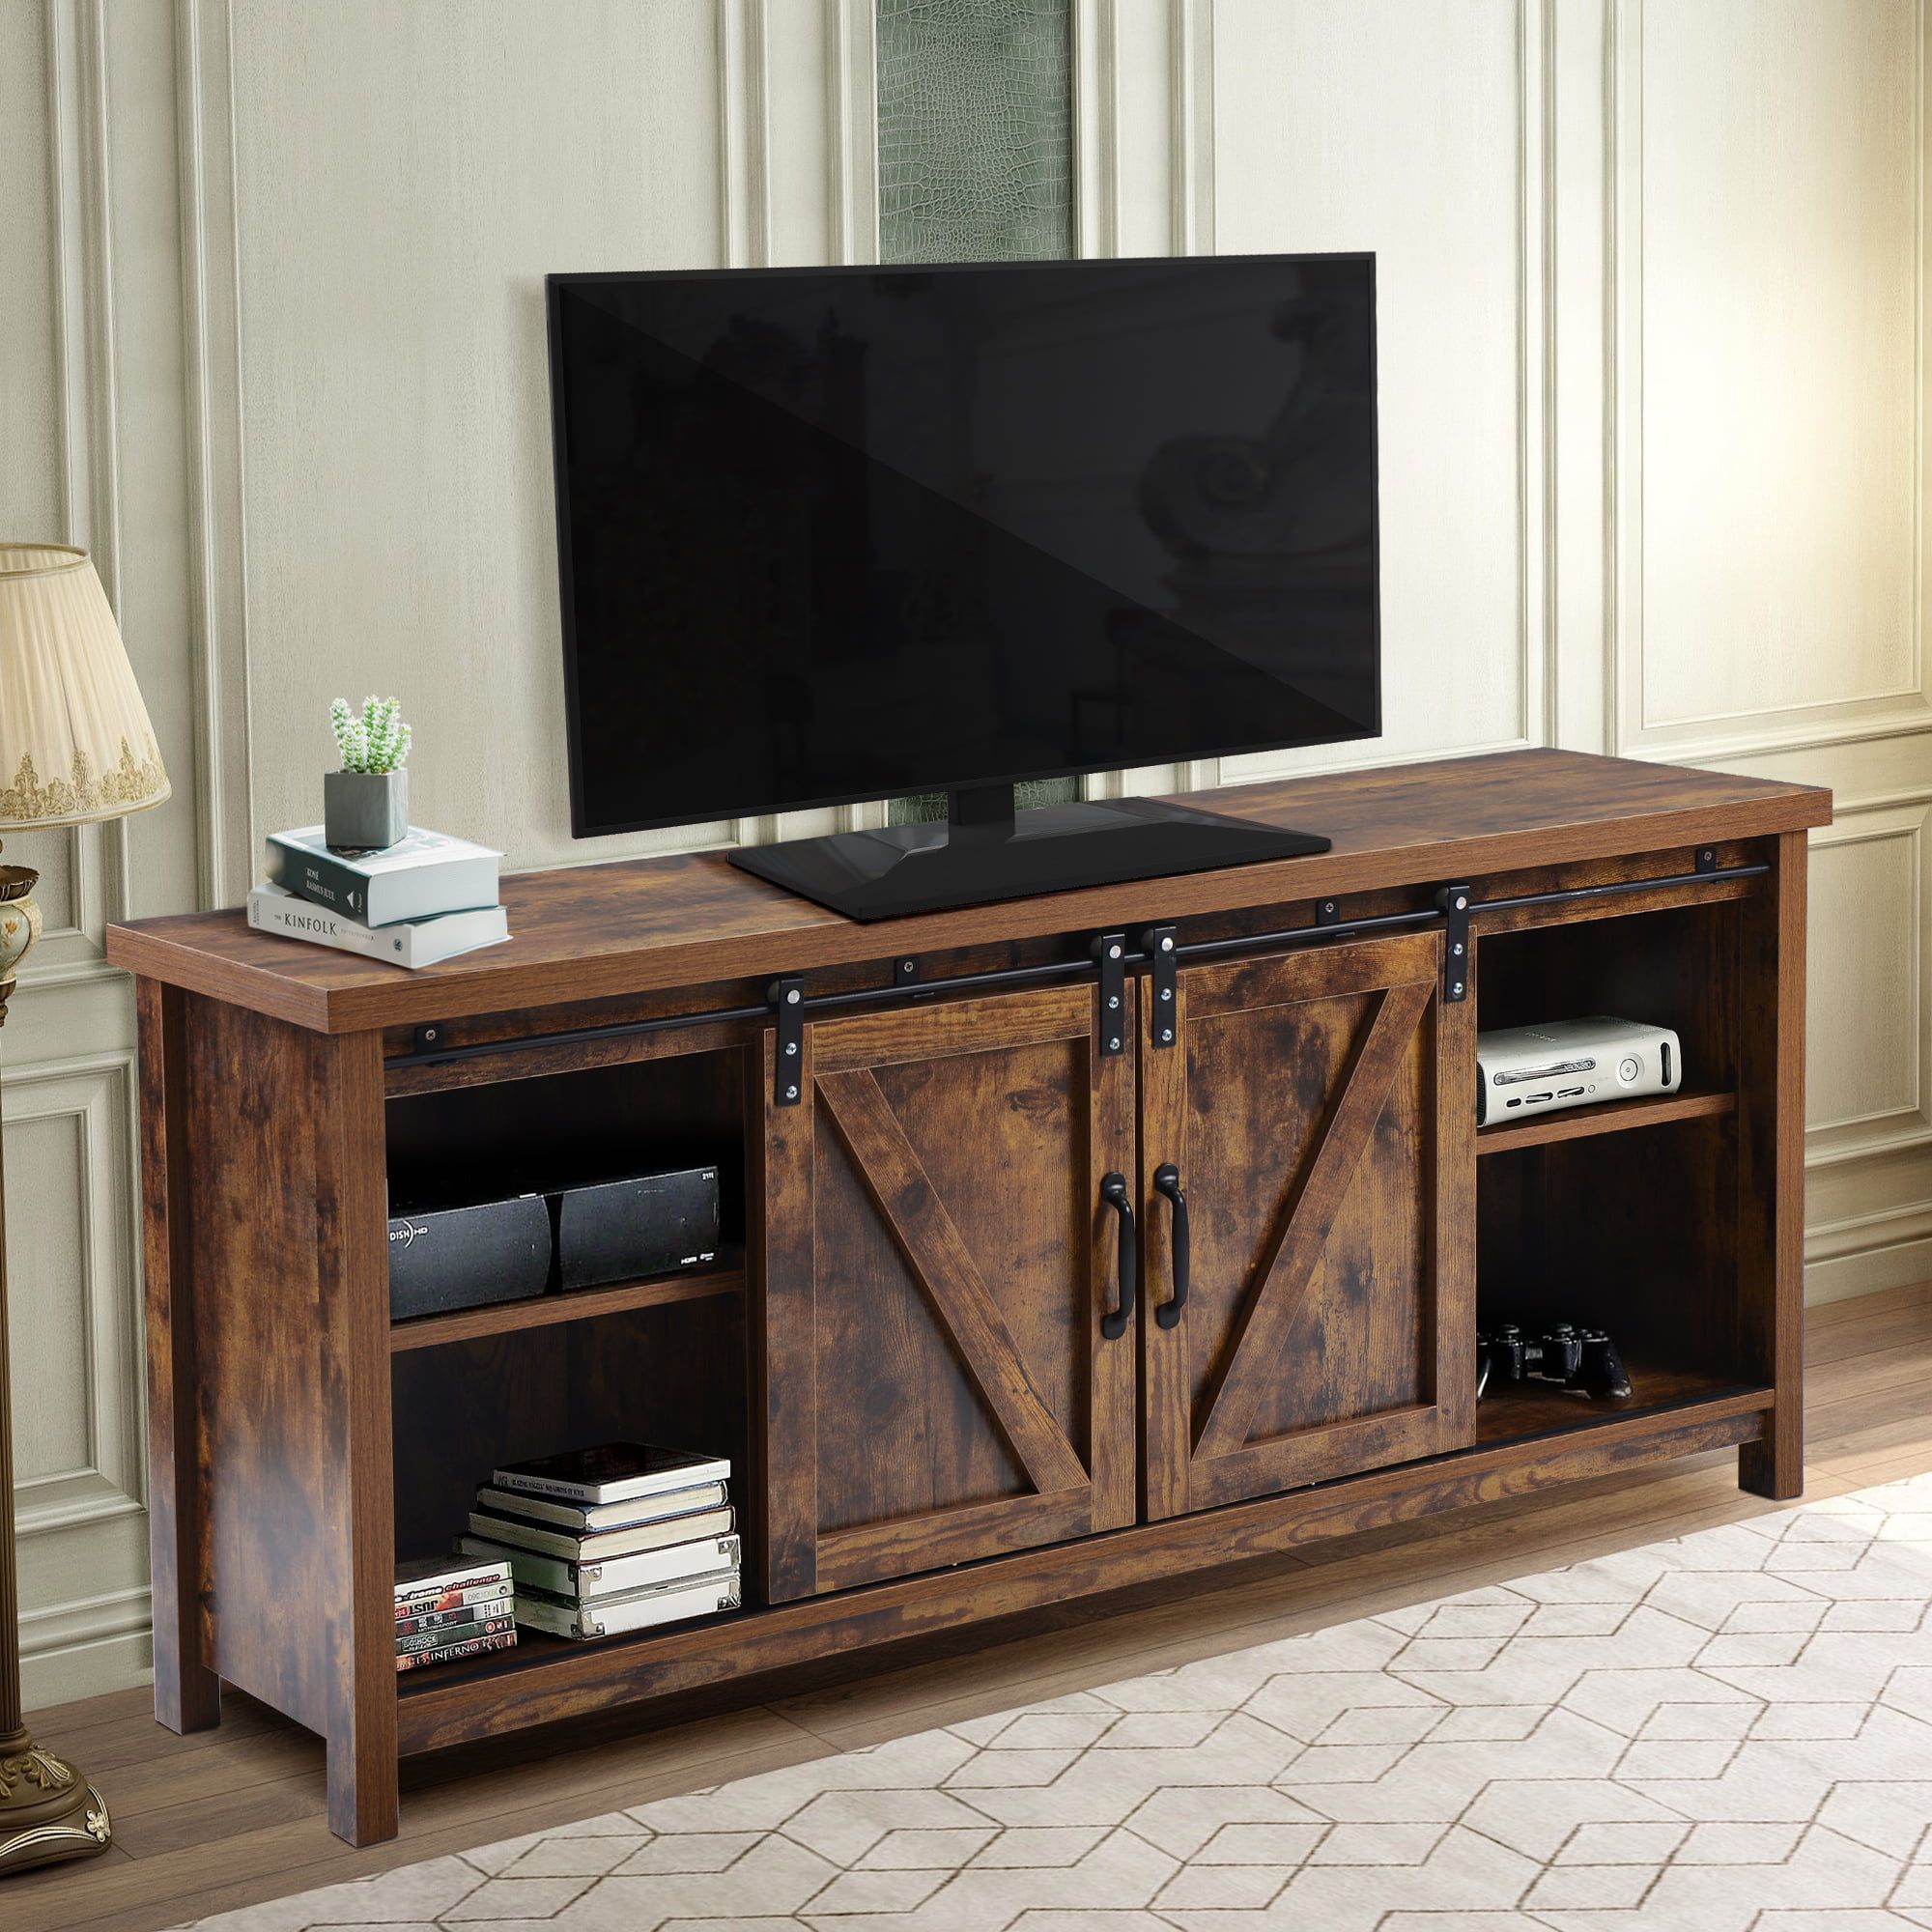 Buy Farmhouse 52'' Tv Stands With Adjustable Leg, Segmart Traditional Intended For Modern Farmhouse Rustic Tv Stands (Gallery 15 of 20)